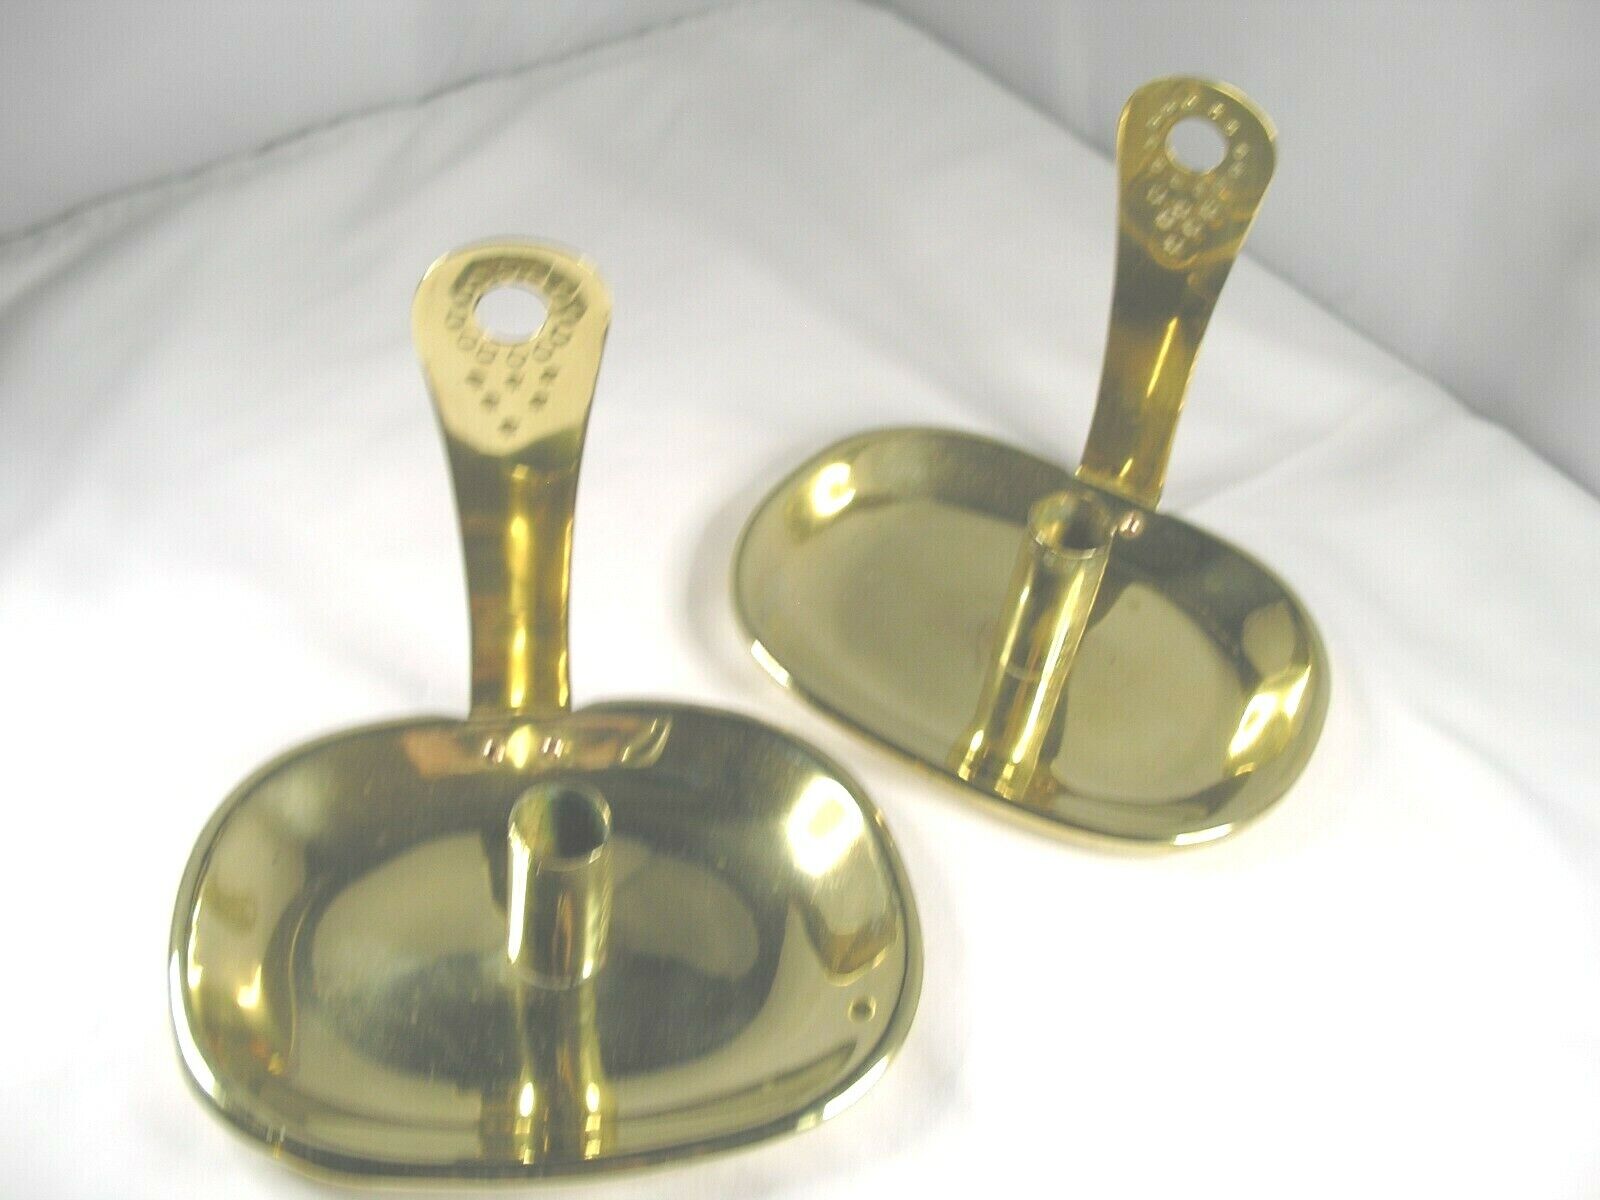 Quite Unusual Colonial Reproduction Solid Brass Sconces: Easy to carry if Needed